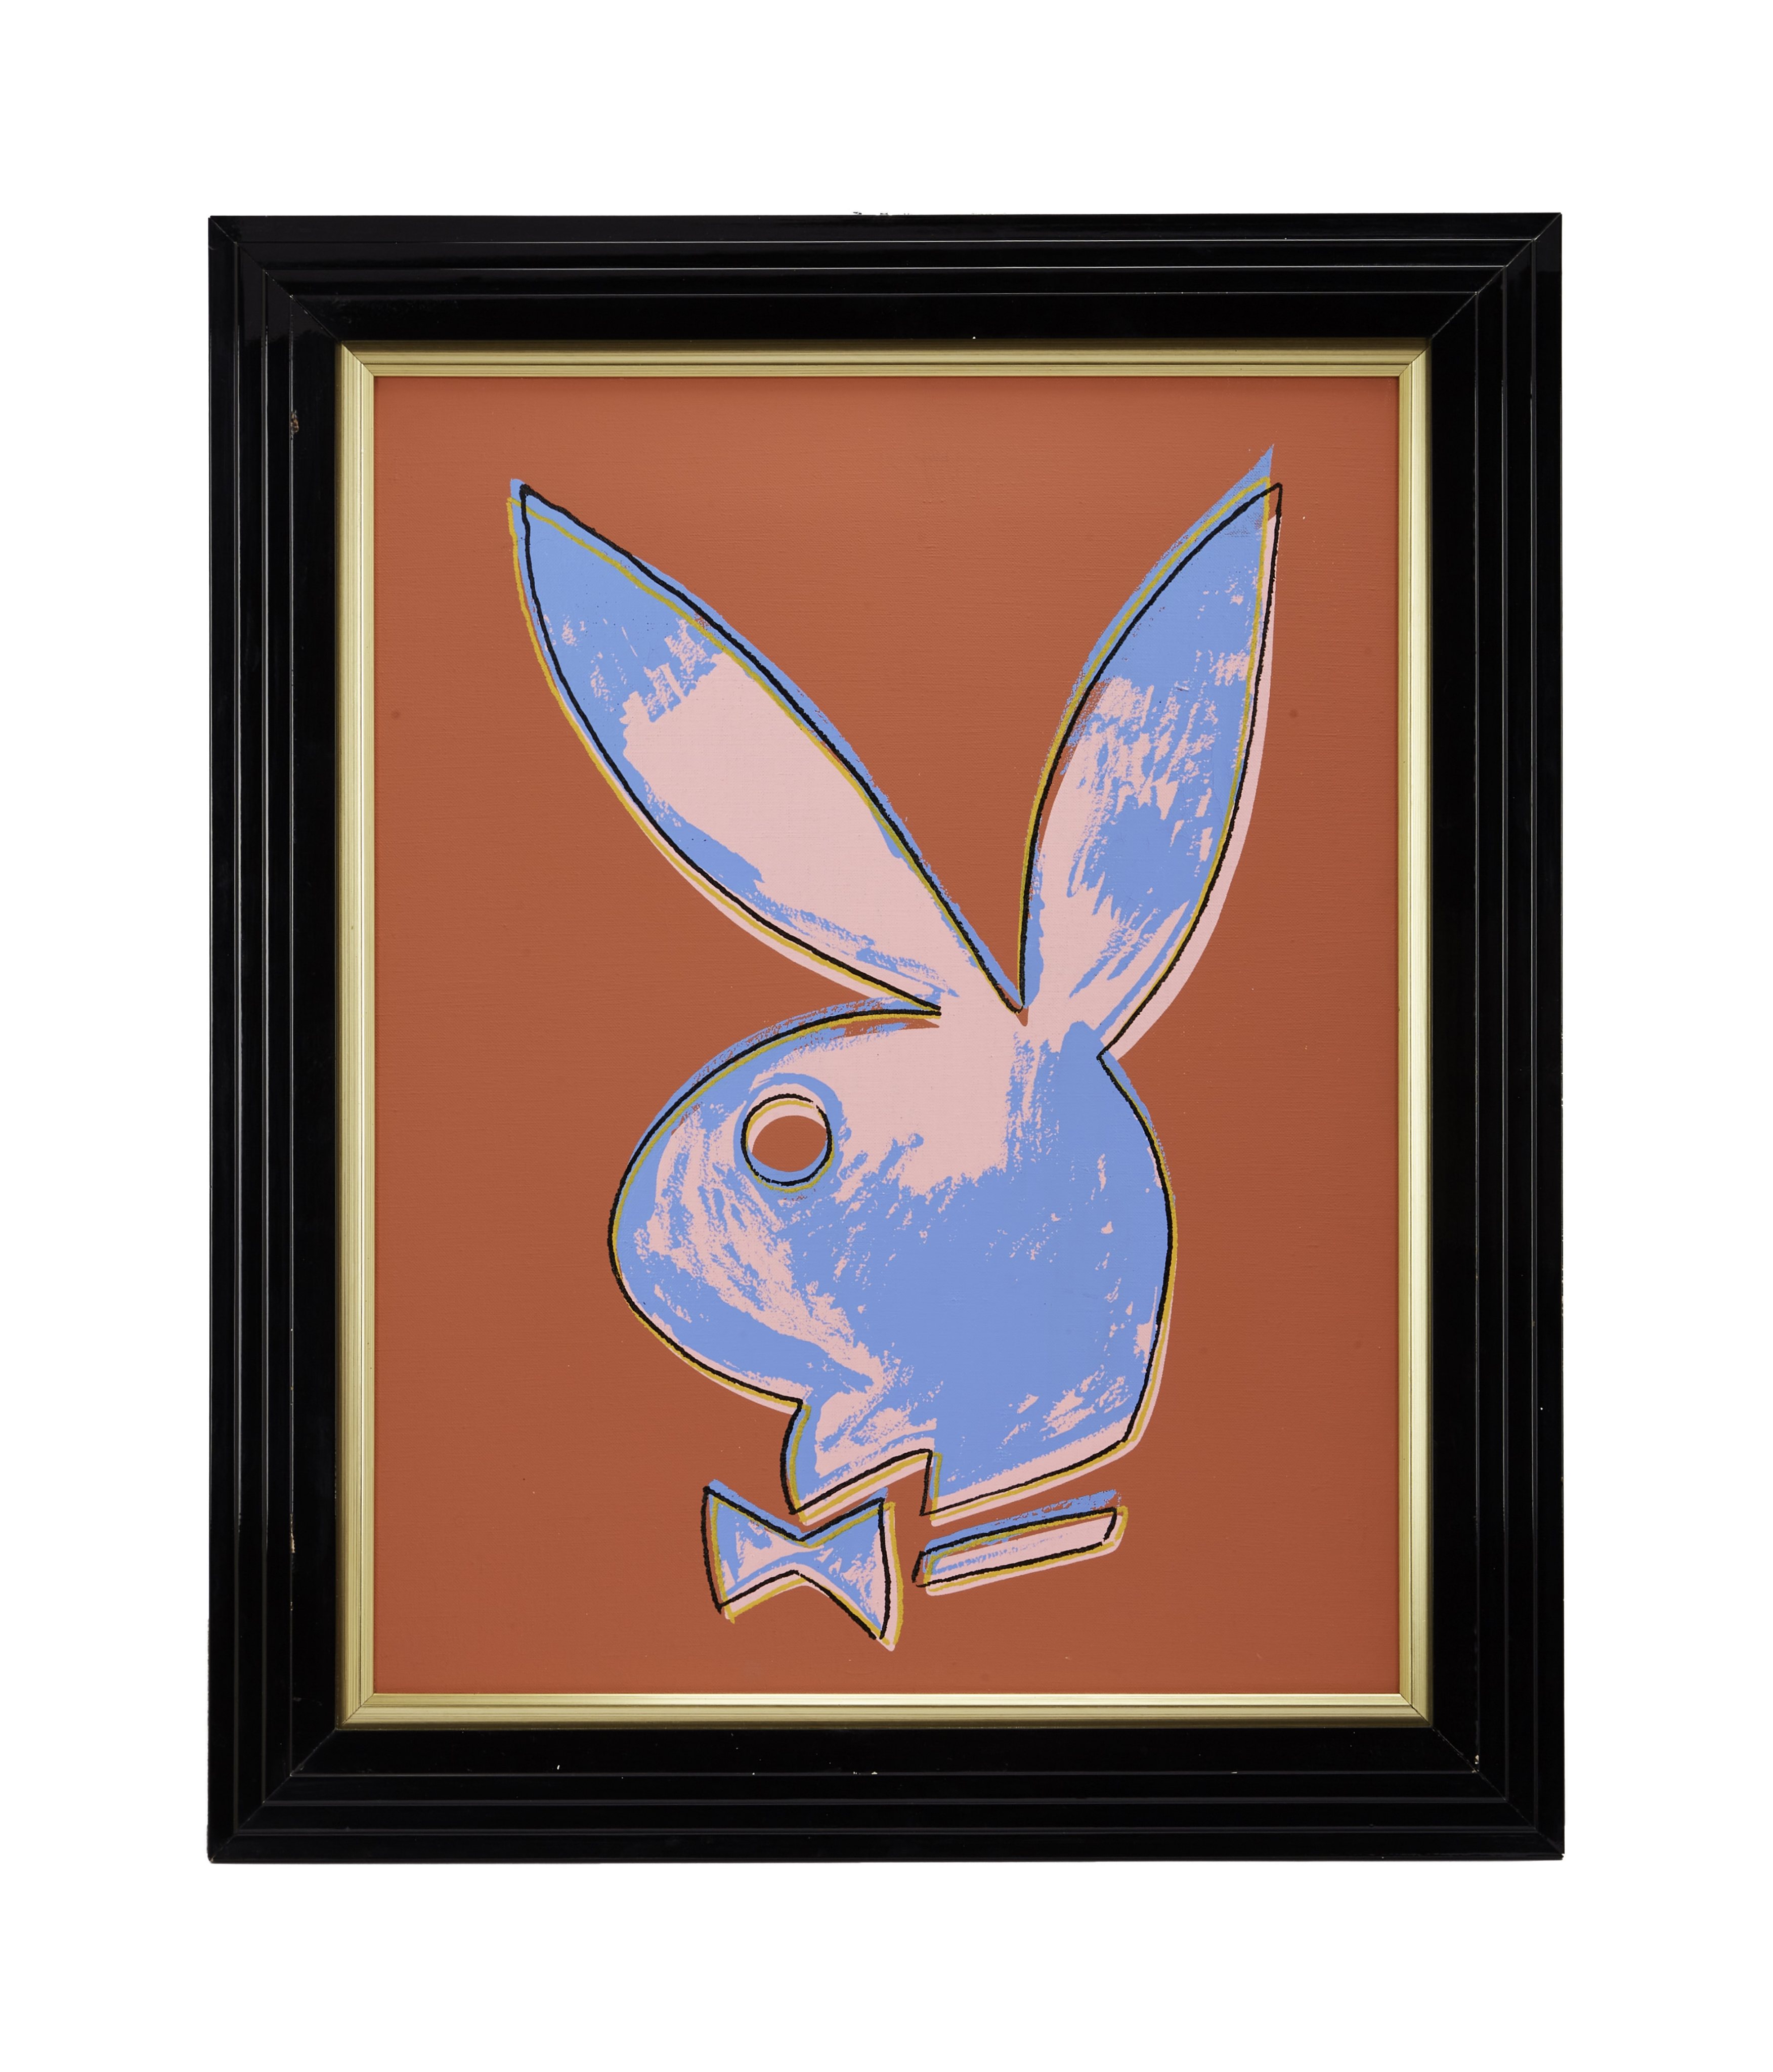 Andy Warhol’s Playboy bunny will go under the hammer at the auction in the US in March, and is part of the coming “Icons: Playboy, Hugh Hefner and Marilyn Monroe” exhibition in Hong Kong. Photo: Julien’s Auctions